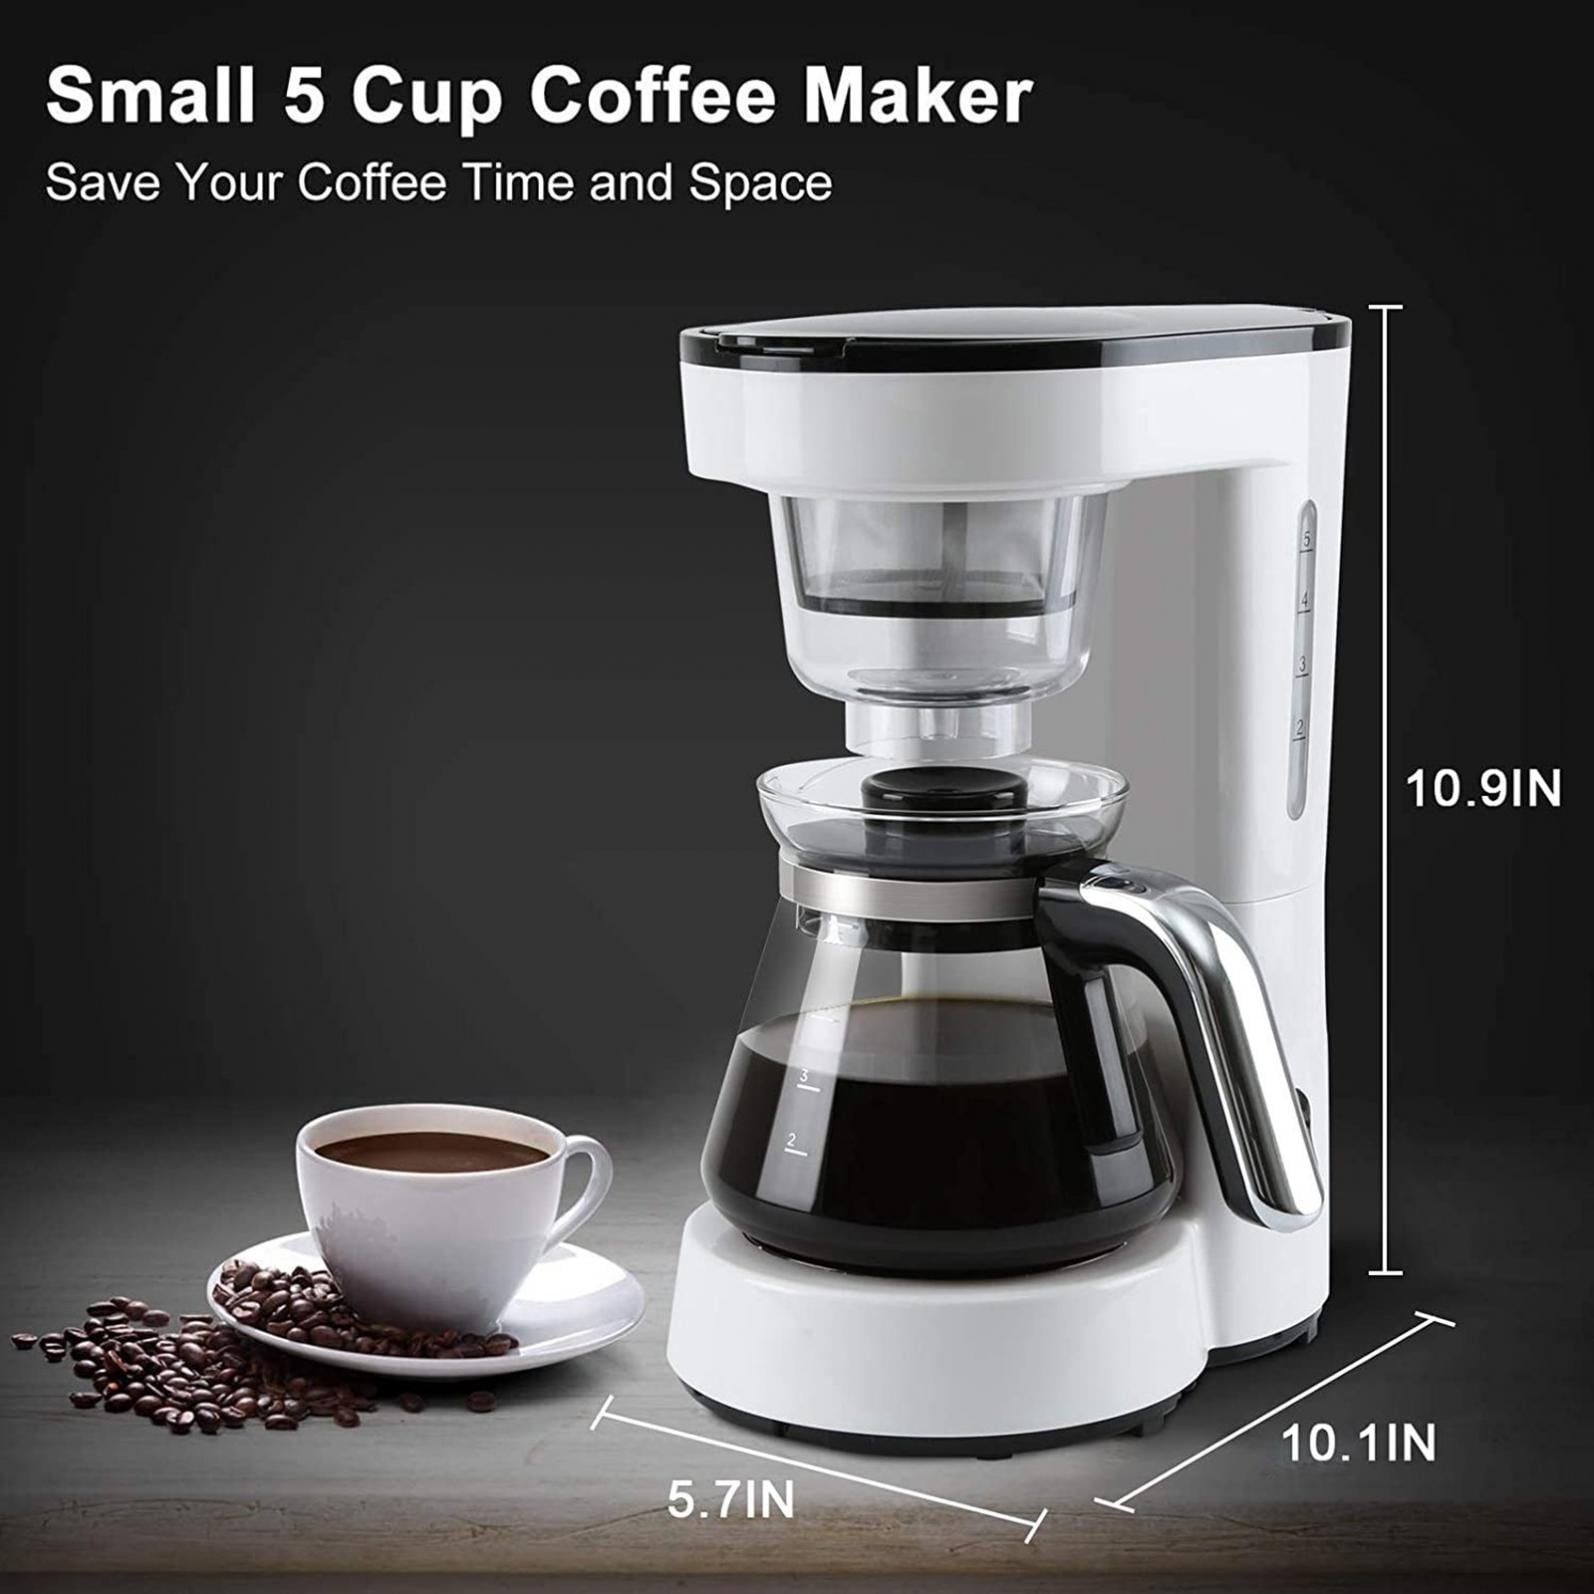 5 Cups Small Coffee Maker, Compact Coffee Machine with Reusable